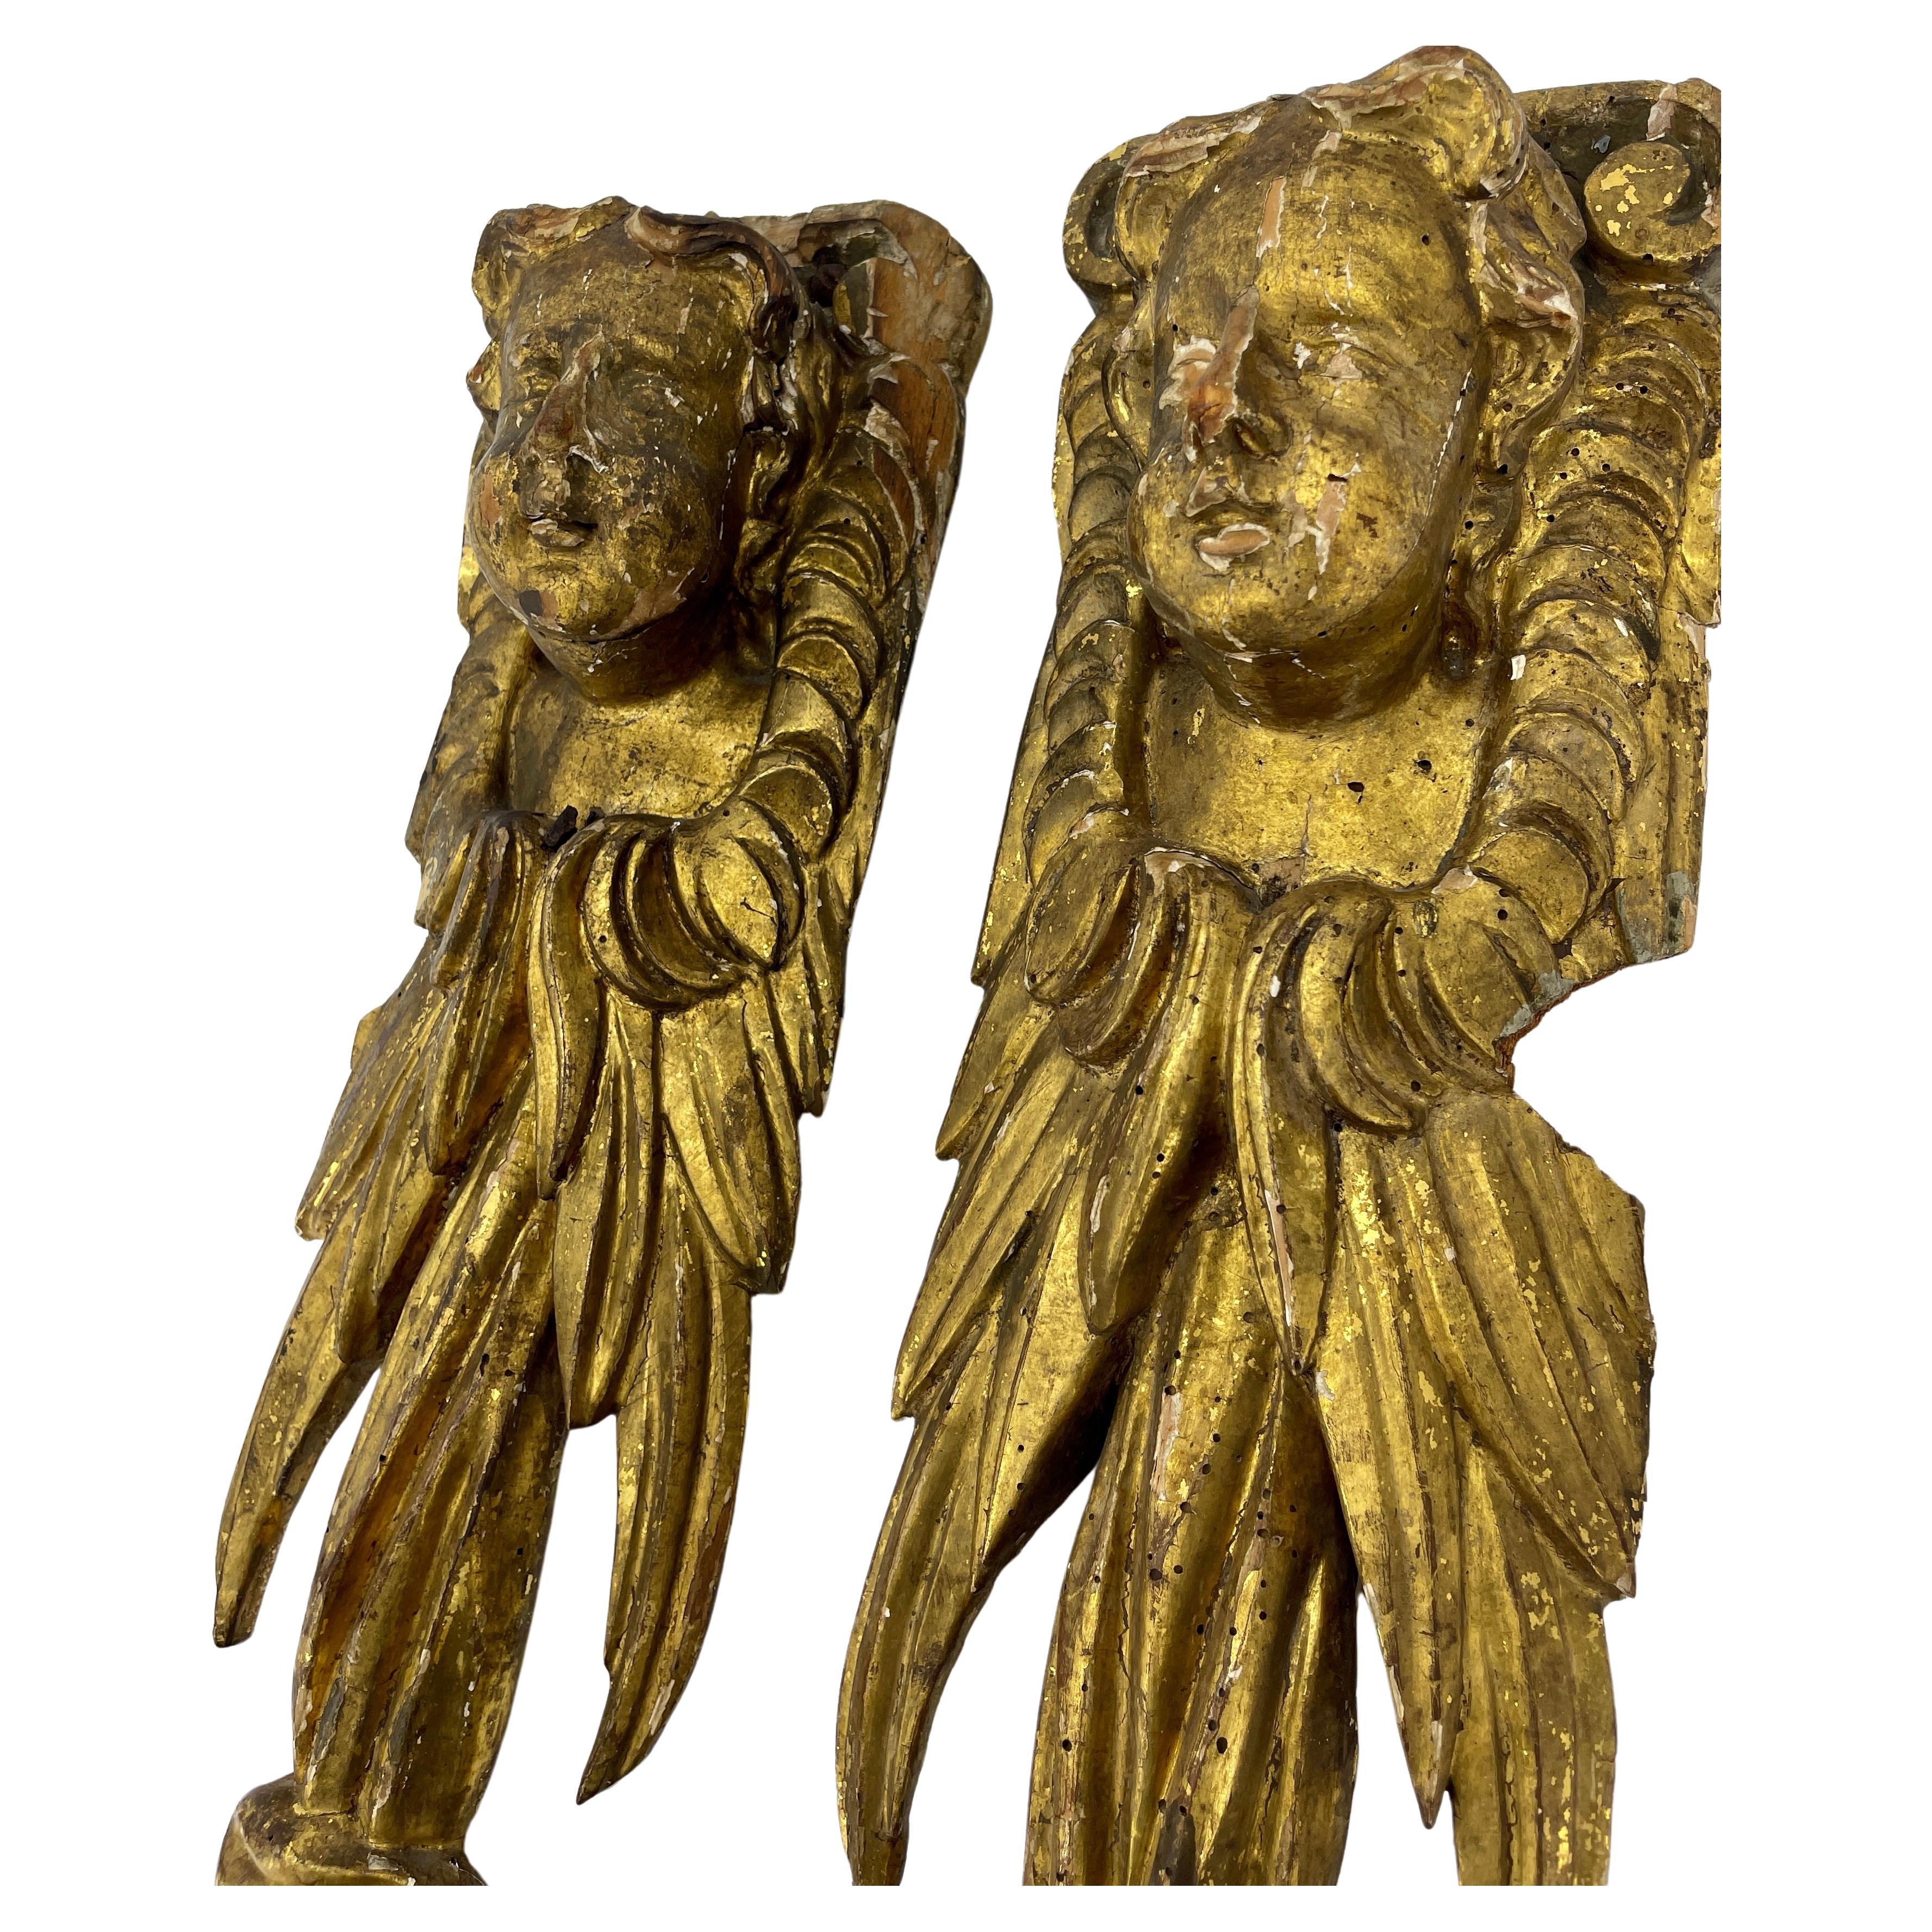 Italian Pair of Baroque Gilt Wood Cherubs Putti Architectural Wall Carvings For Sale